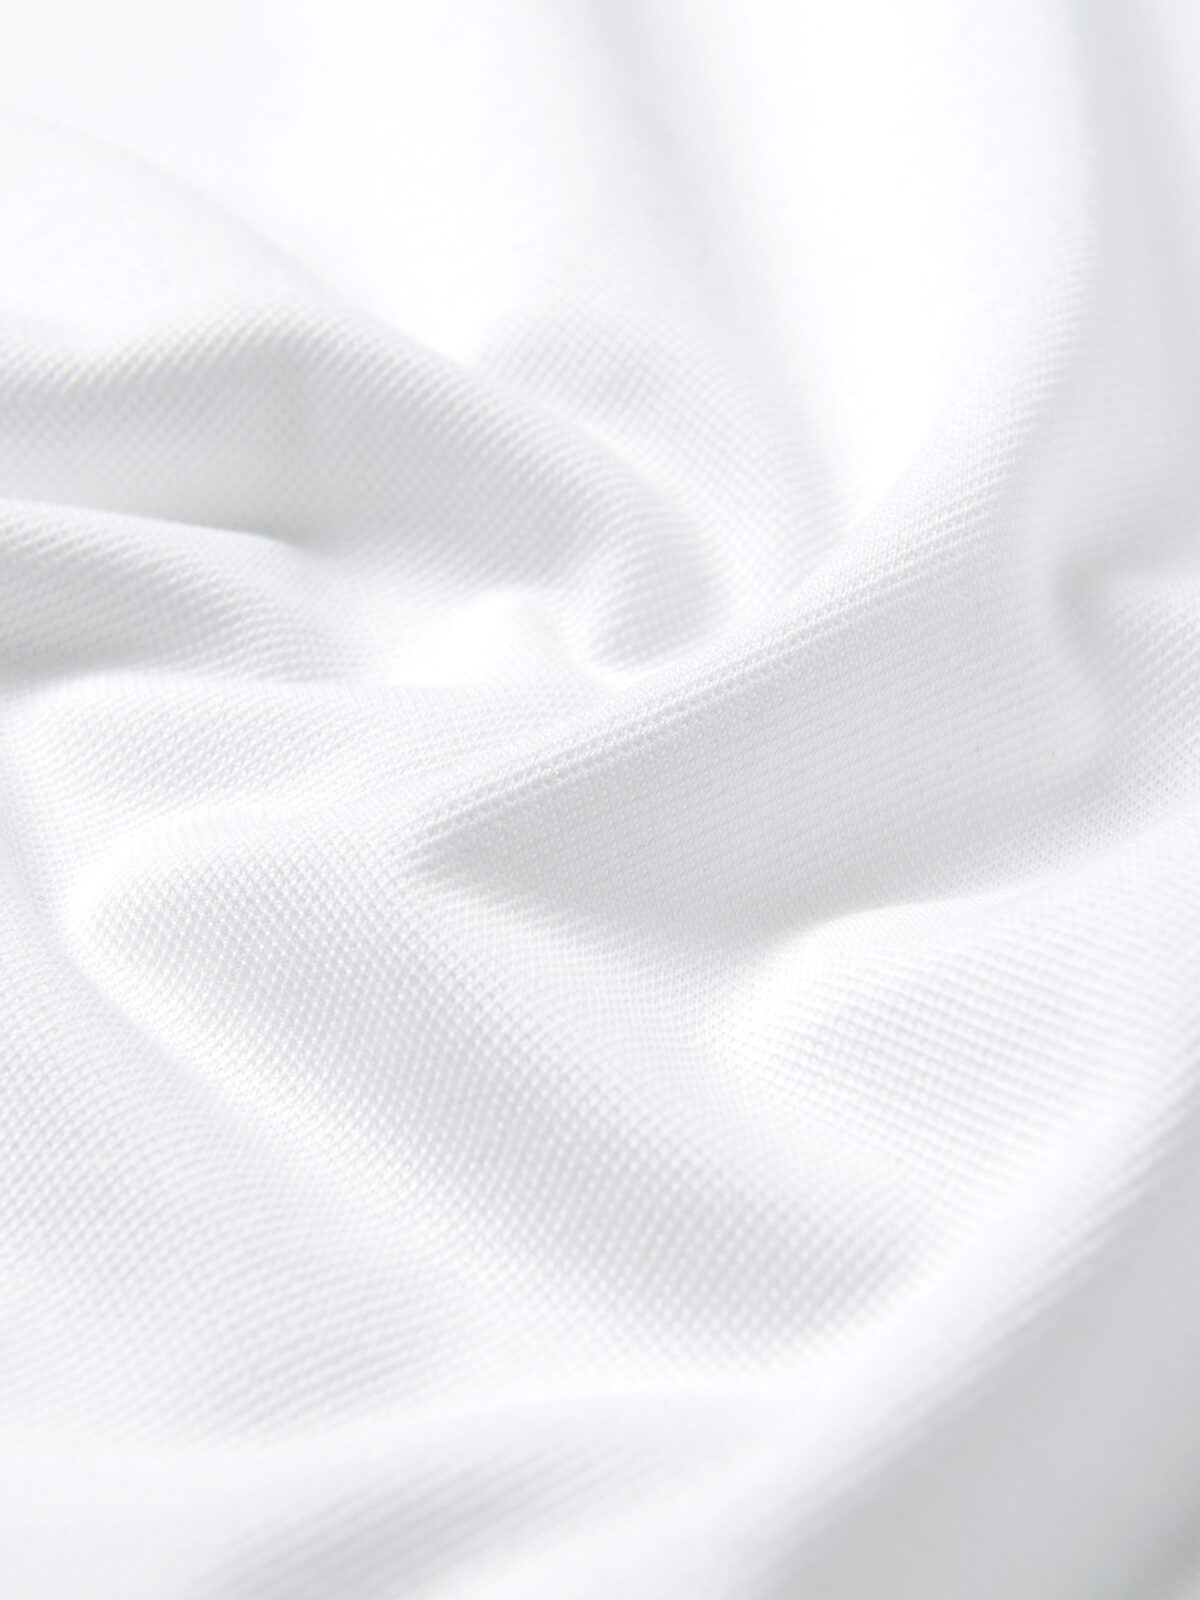 Japanese White Performance Knit Pique Shirts by Proper Cloth